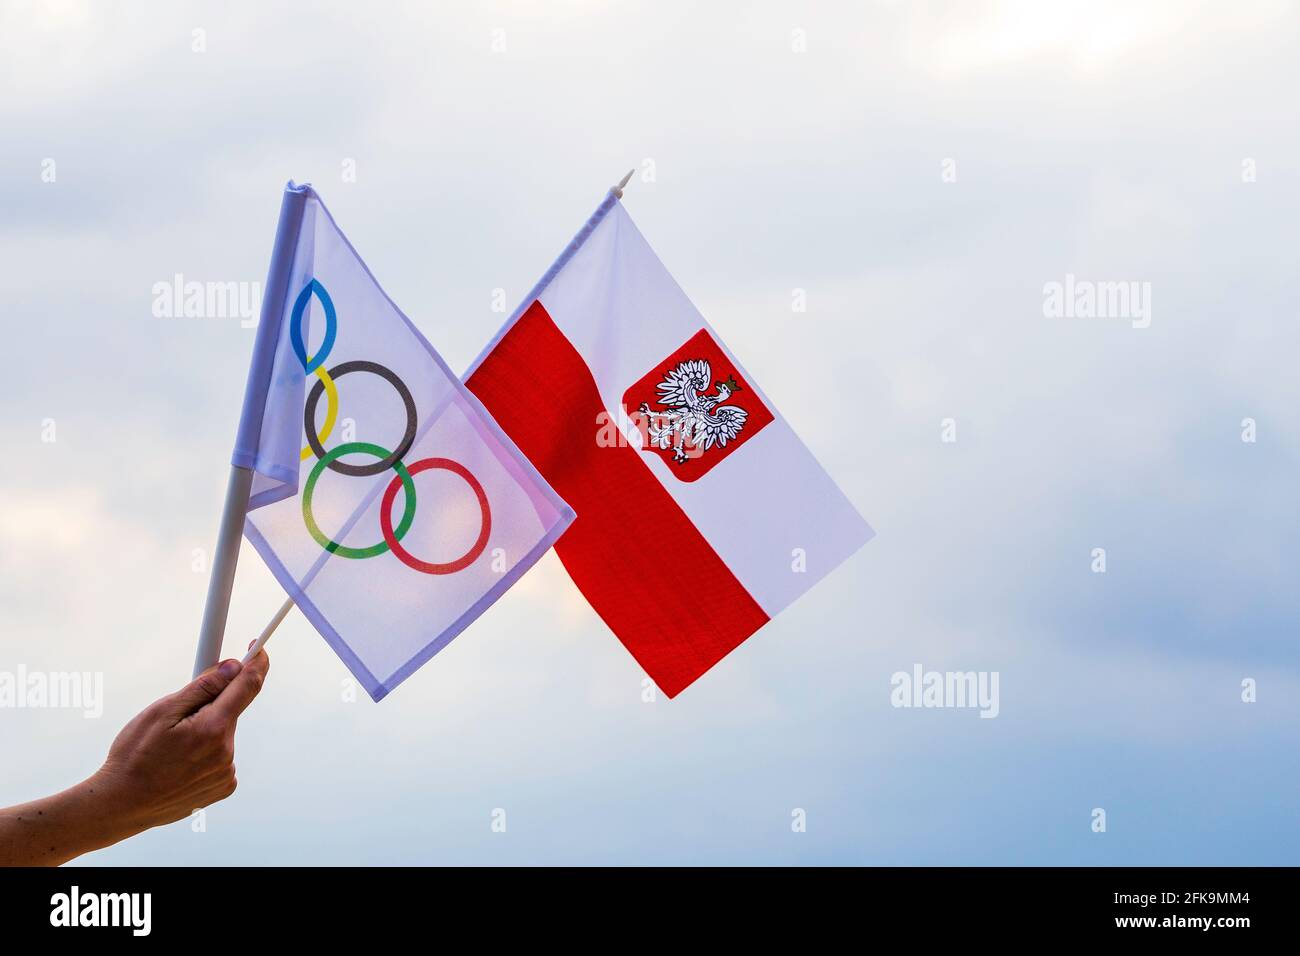 Fan waving the national flag of  Poland and the Olympic flag with symbol olympics rings. Stock Photo